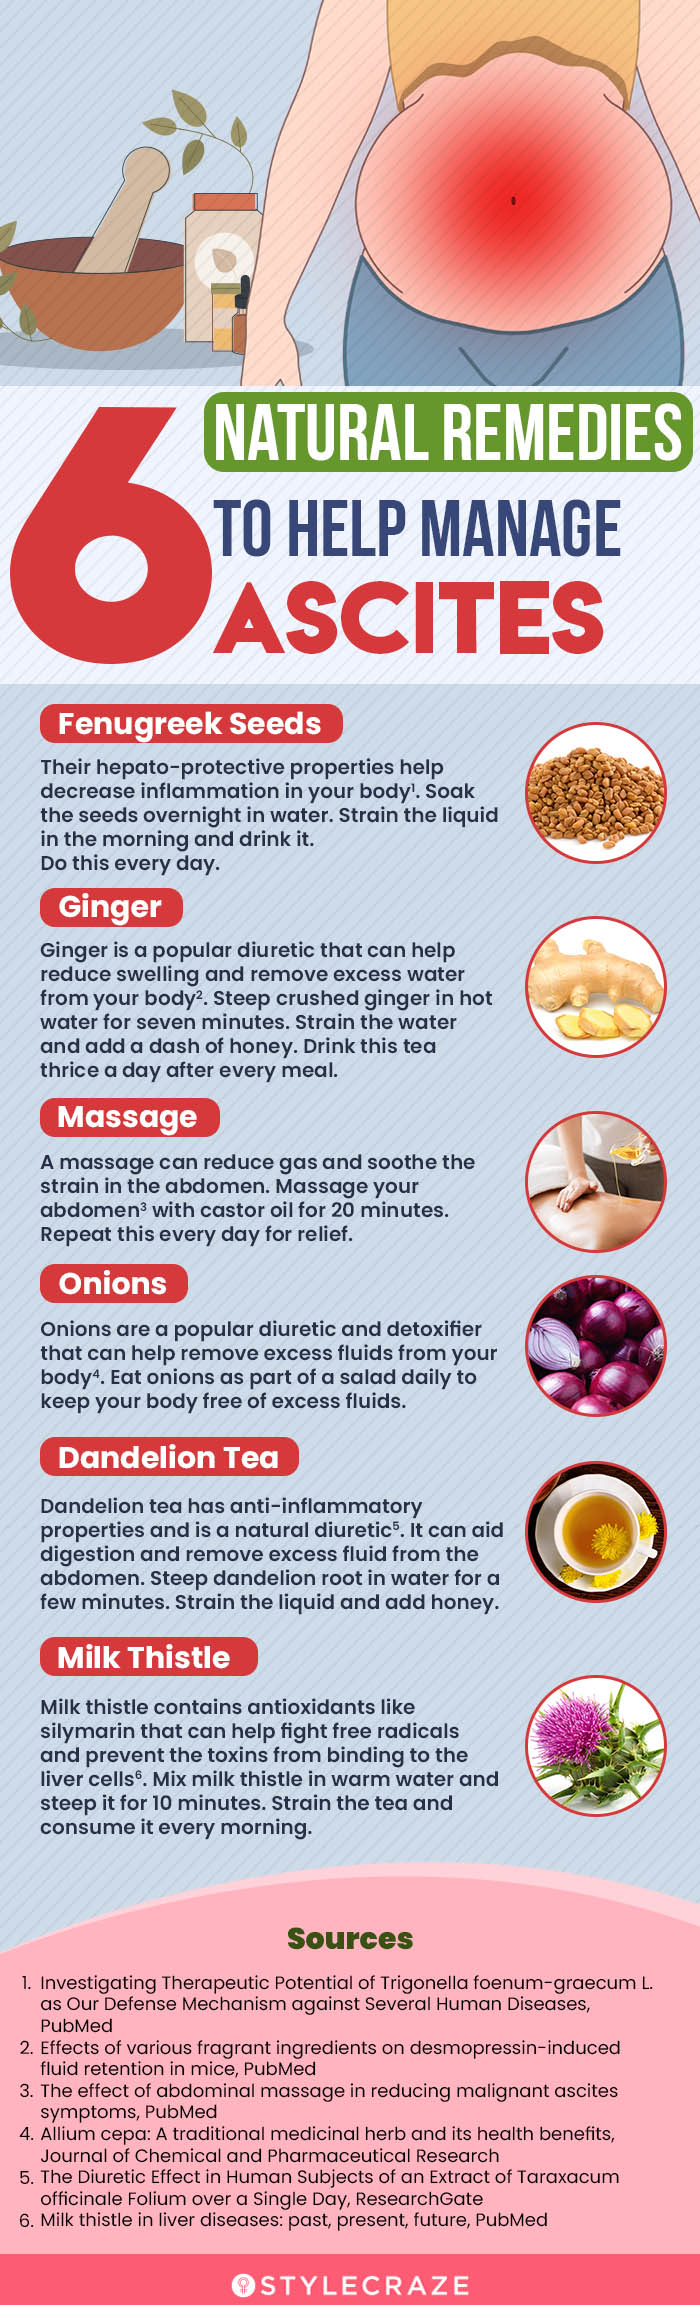 6 natural remedies to help manage ascites (infographic)